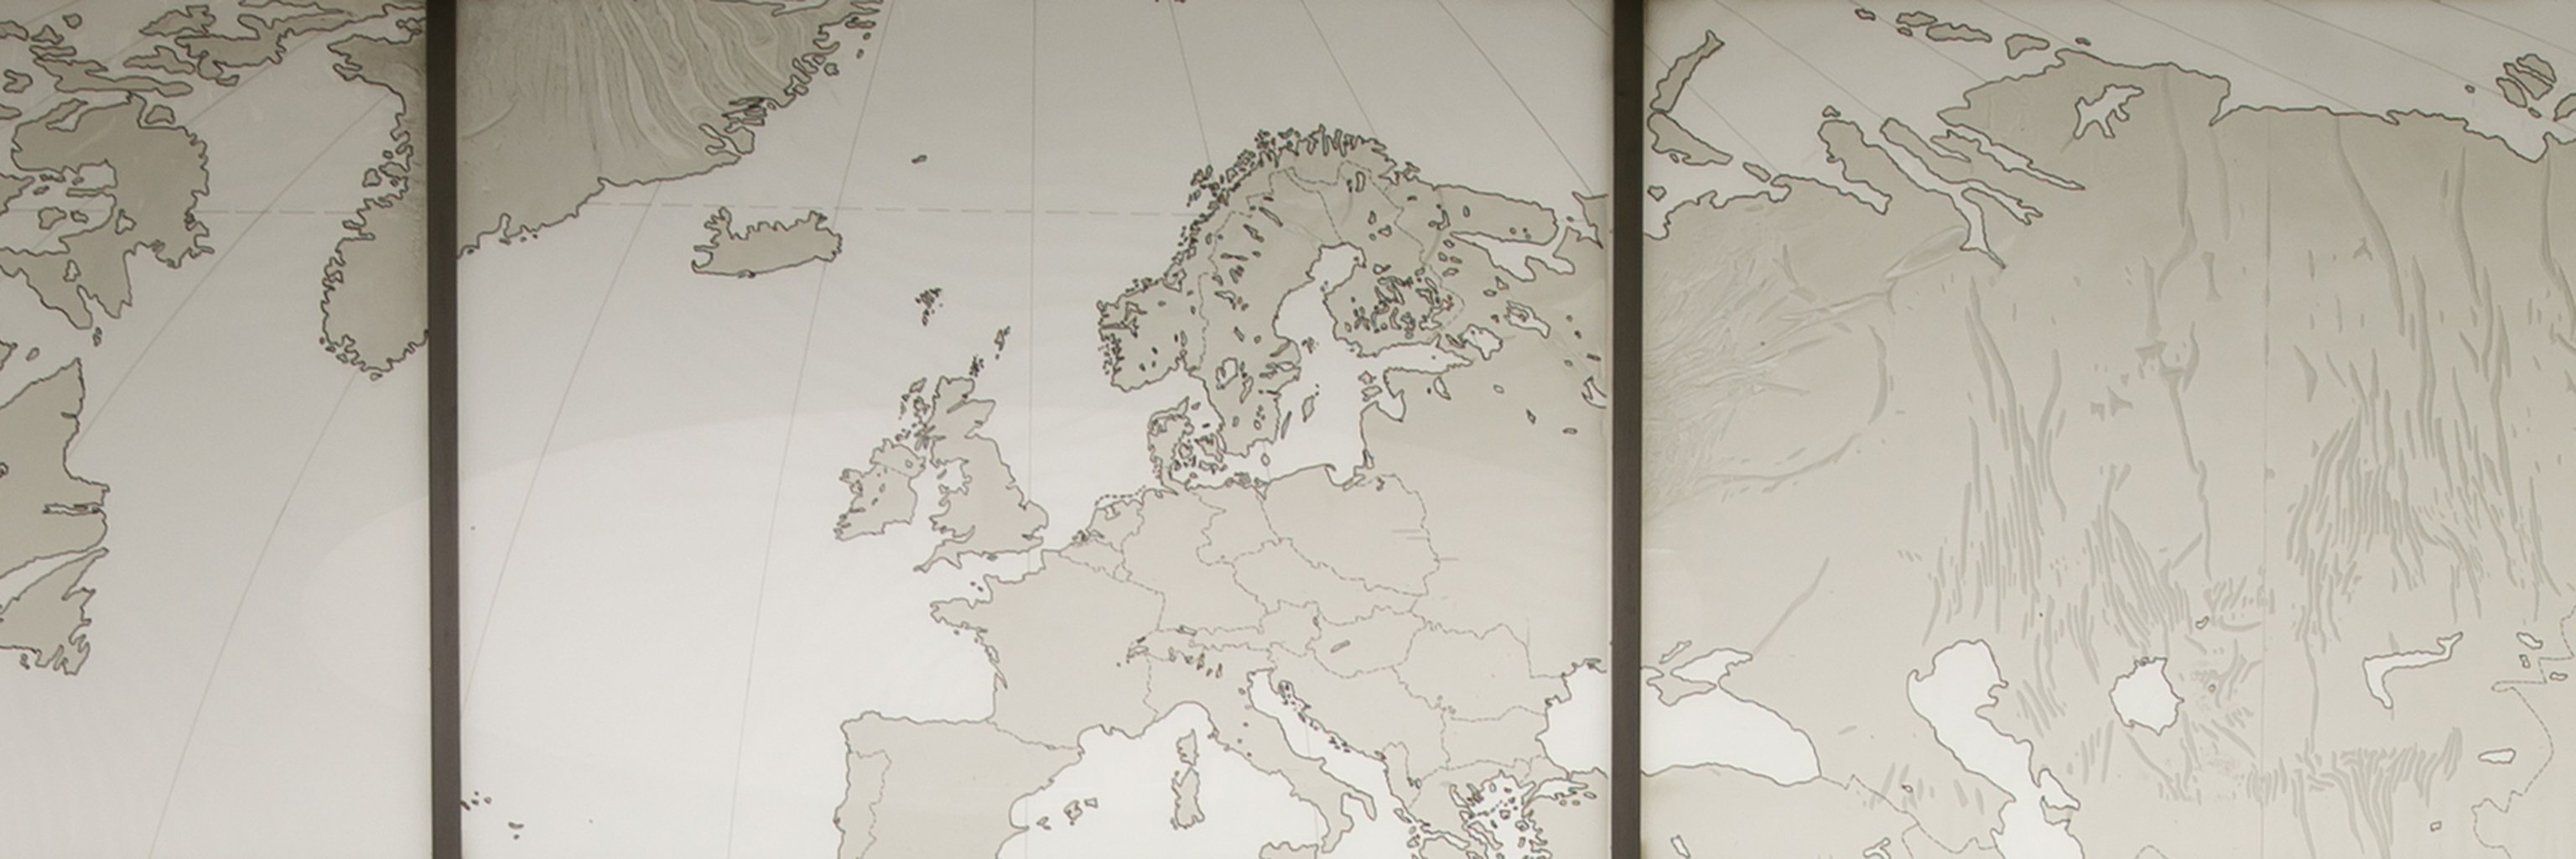 World map display as seen on the Indiana University Bloomington campus.